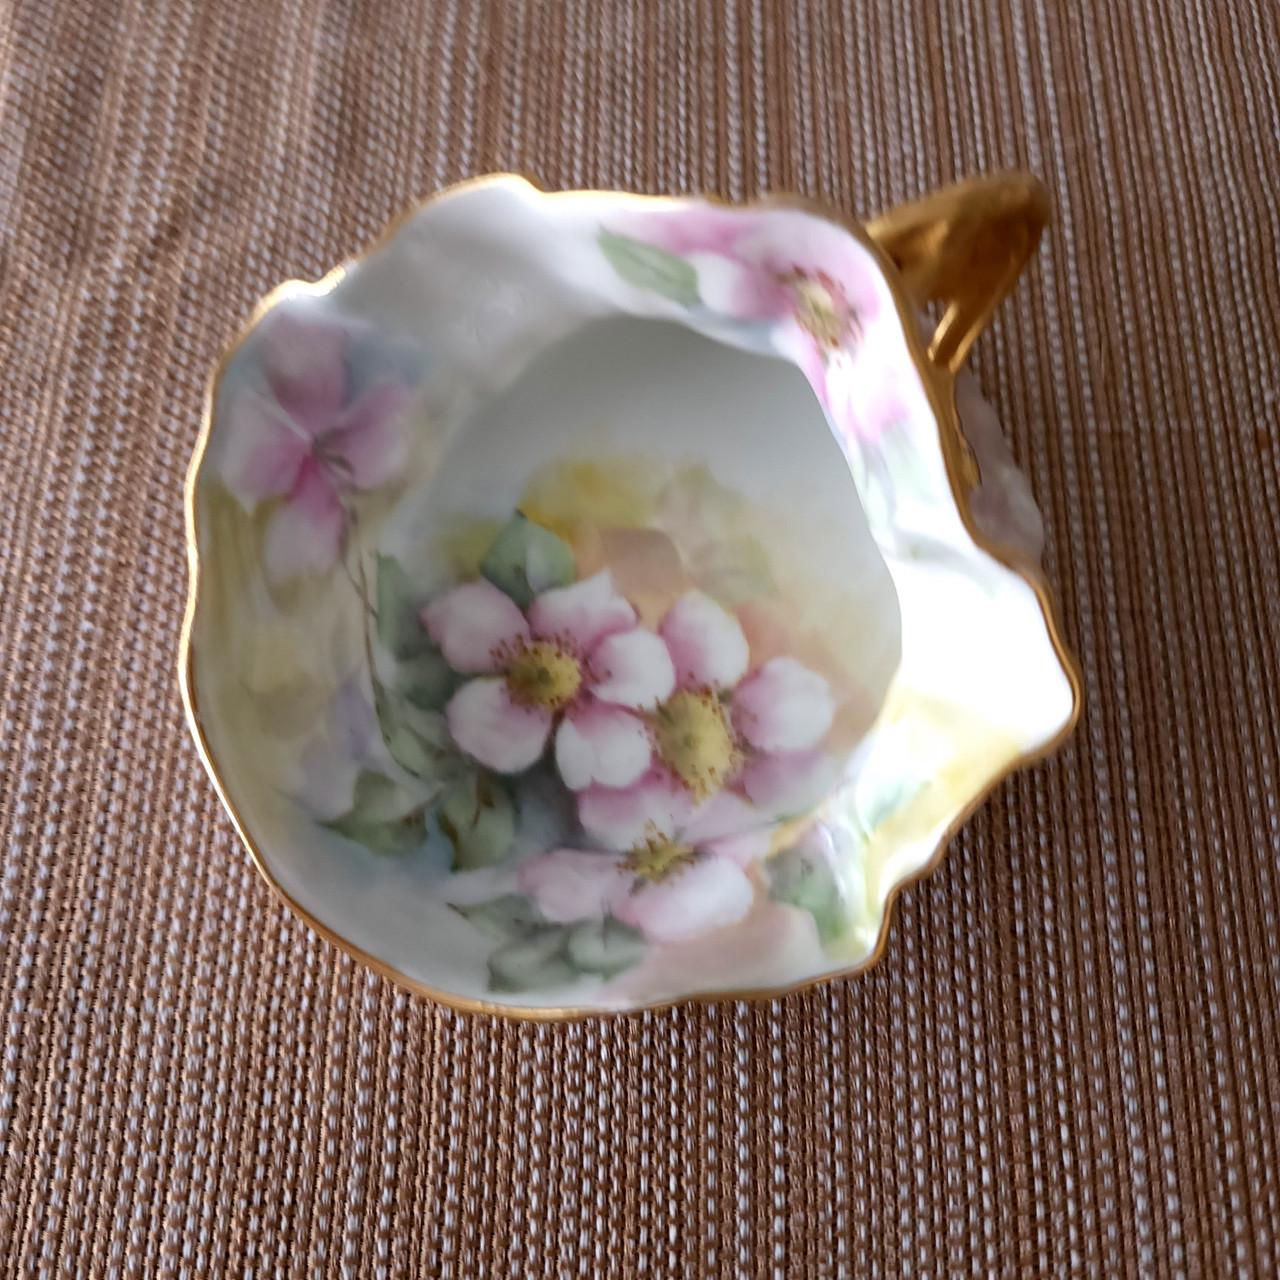 Tressemanes & Vogt Antique Limoges France Hand Painted Collectible Spittoon In Excellent Condition For Sale In Milford, DE